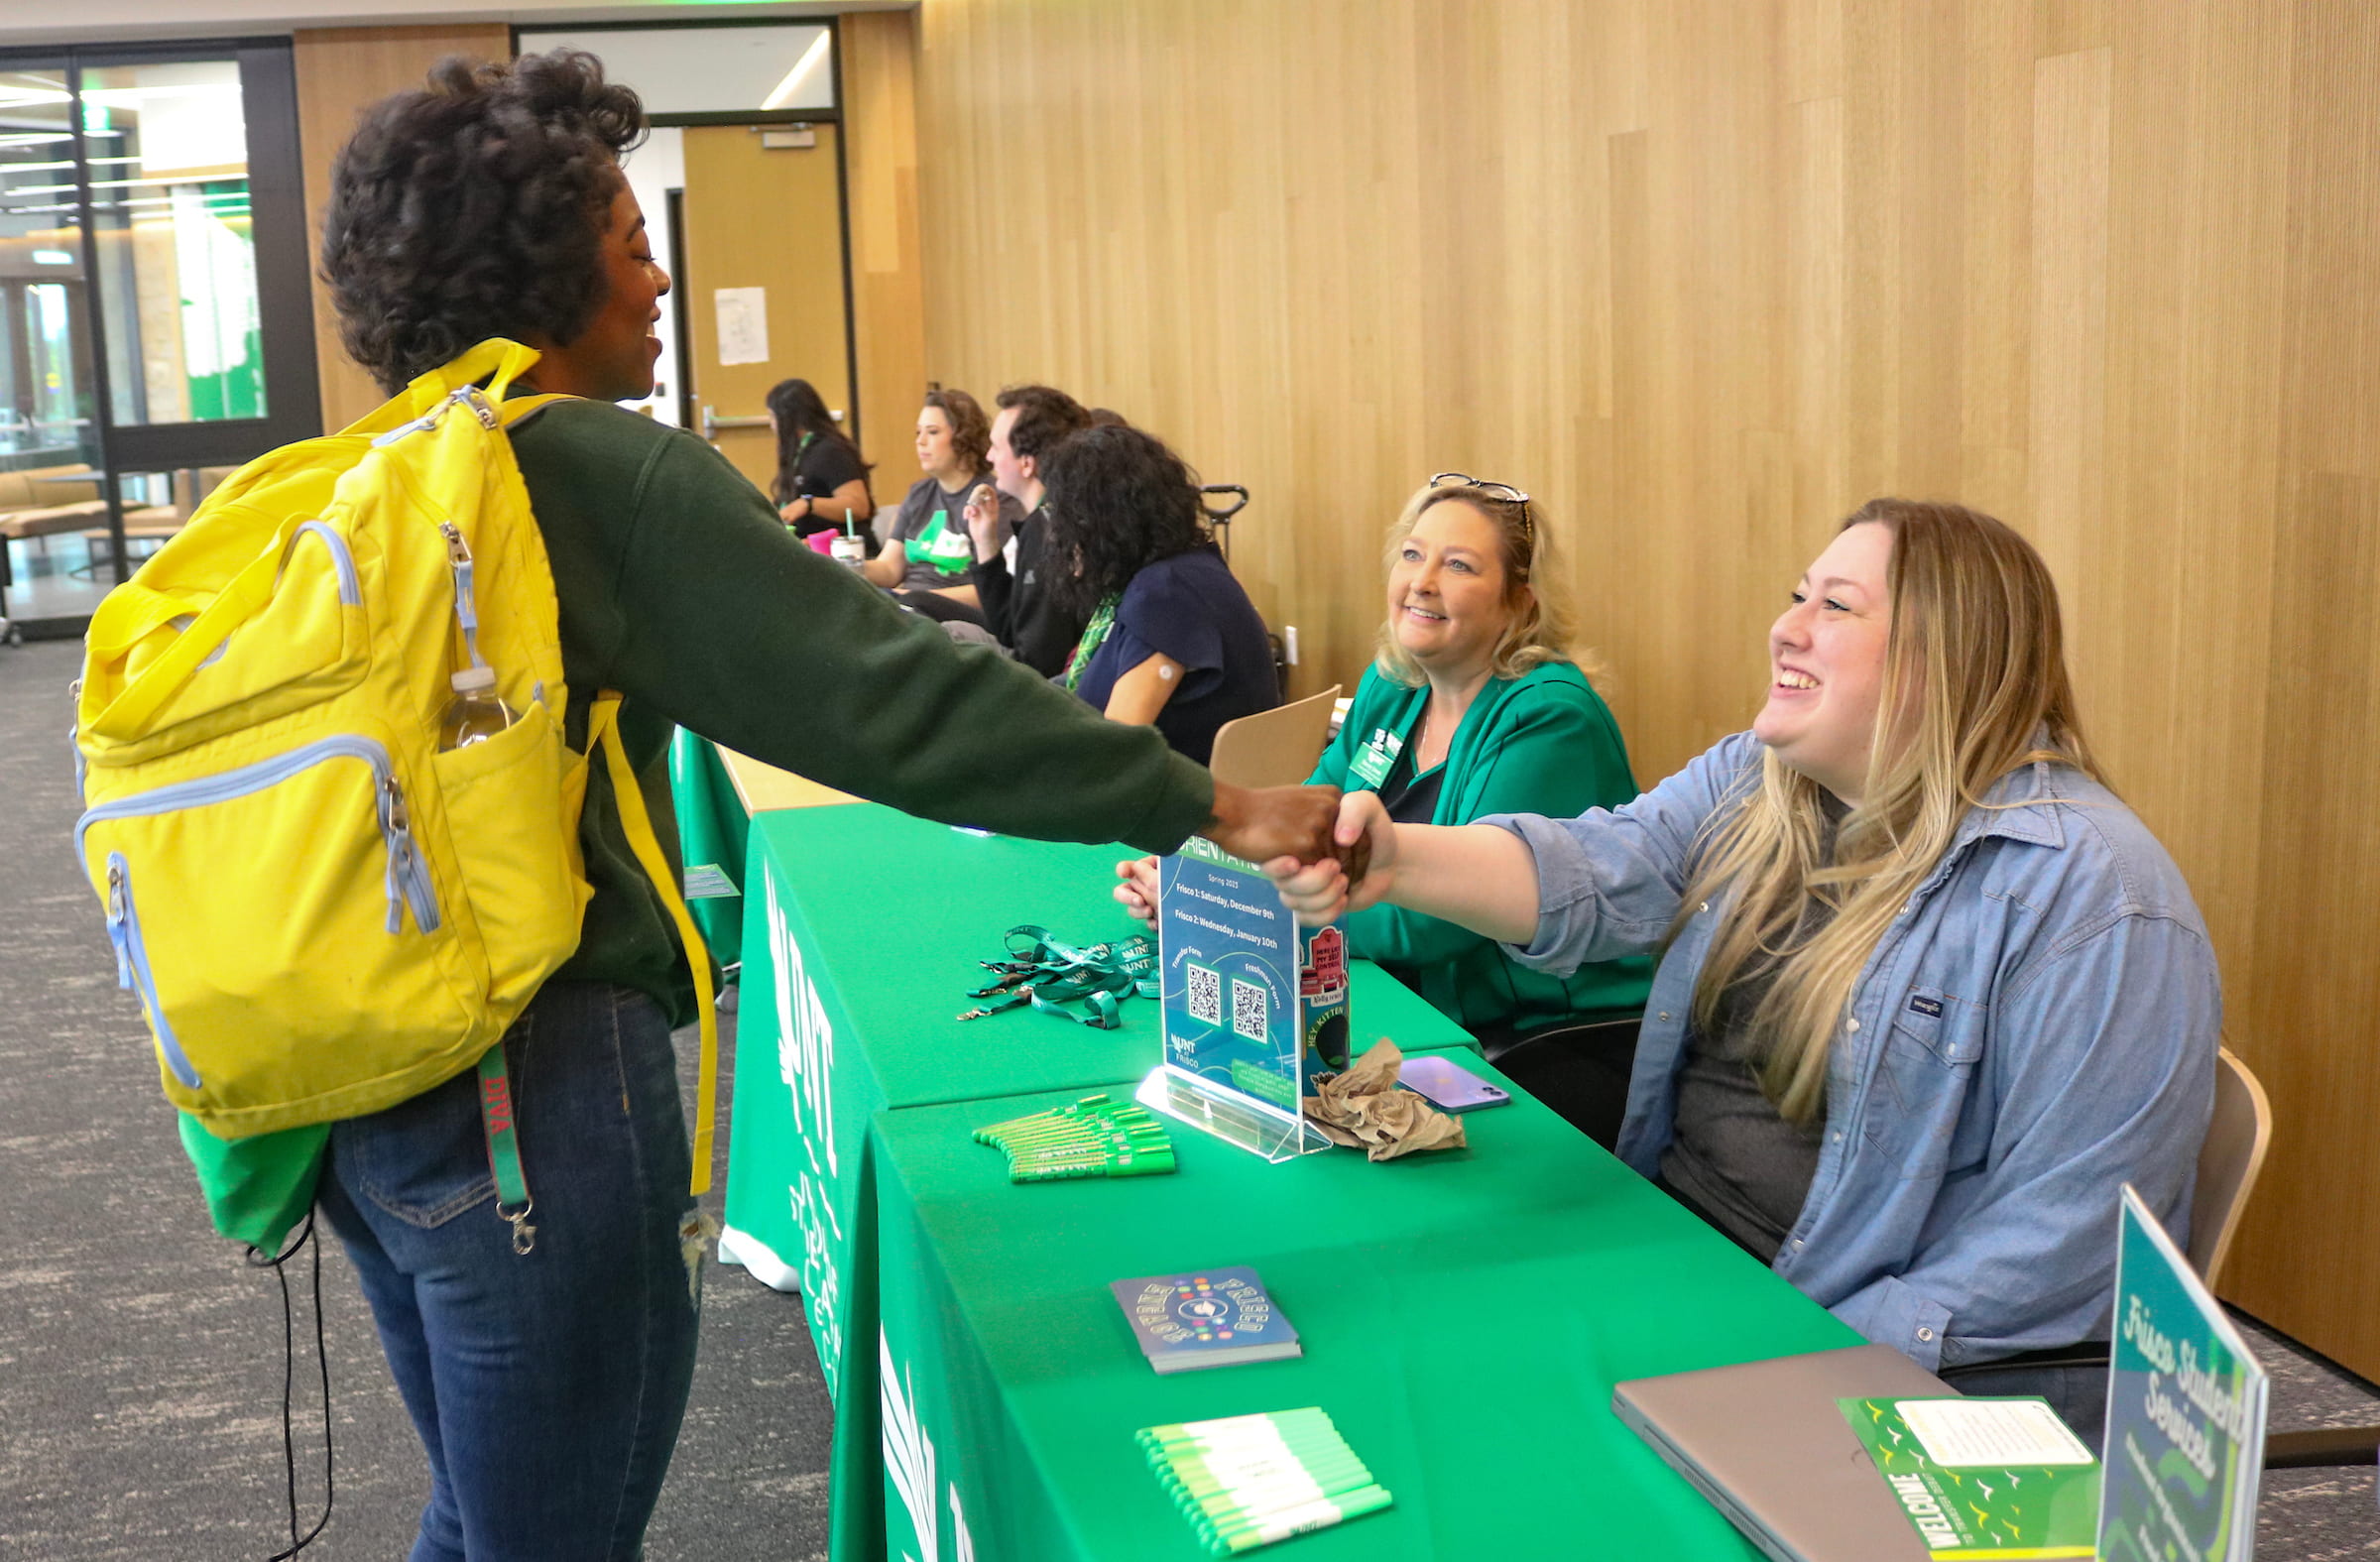 A new student signs up for transfer orientation